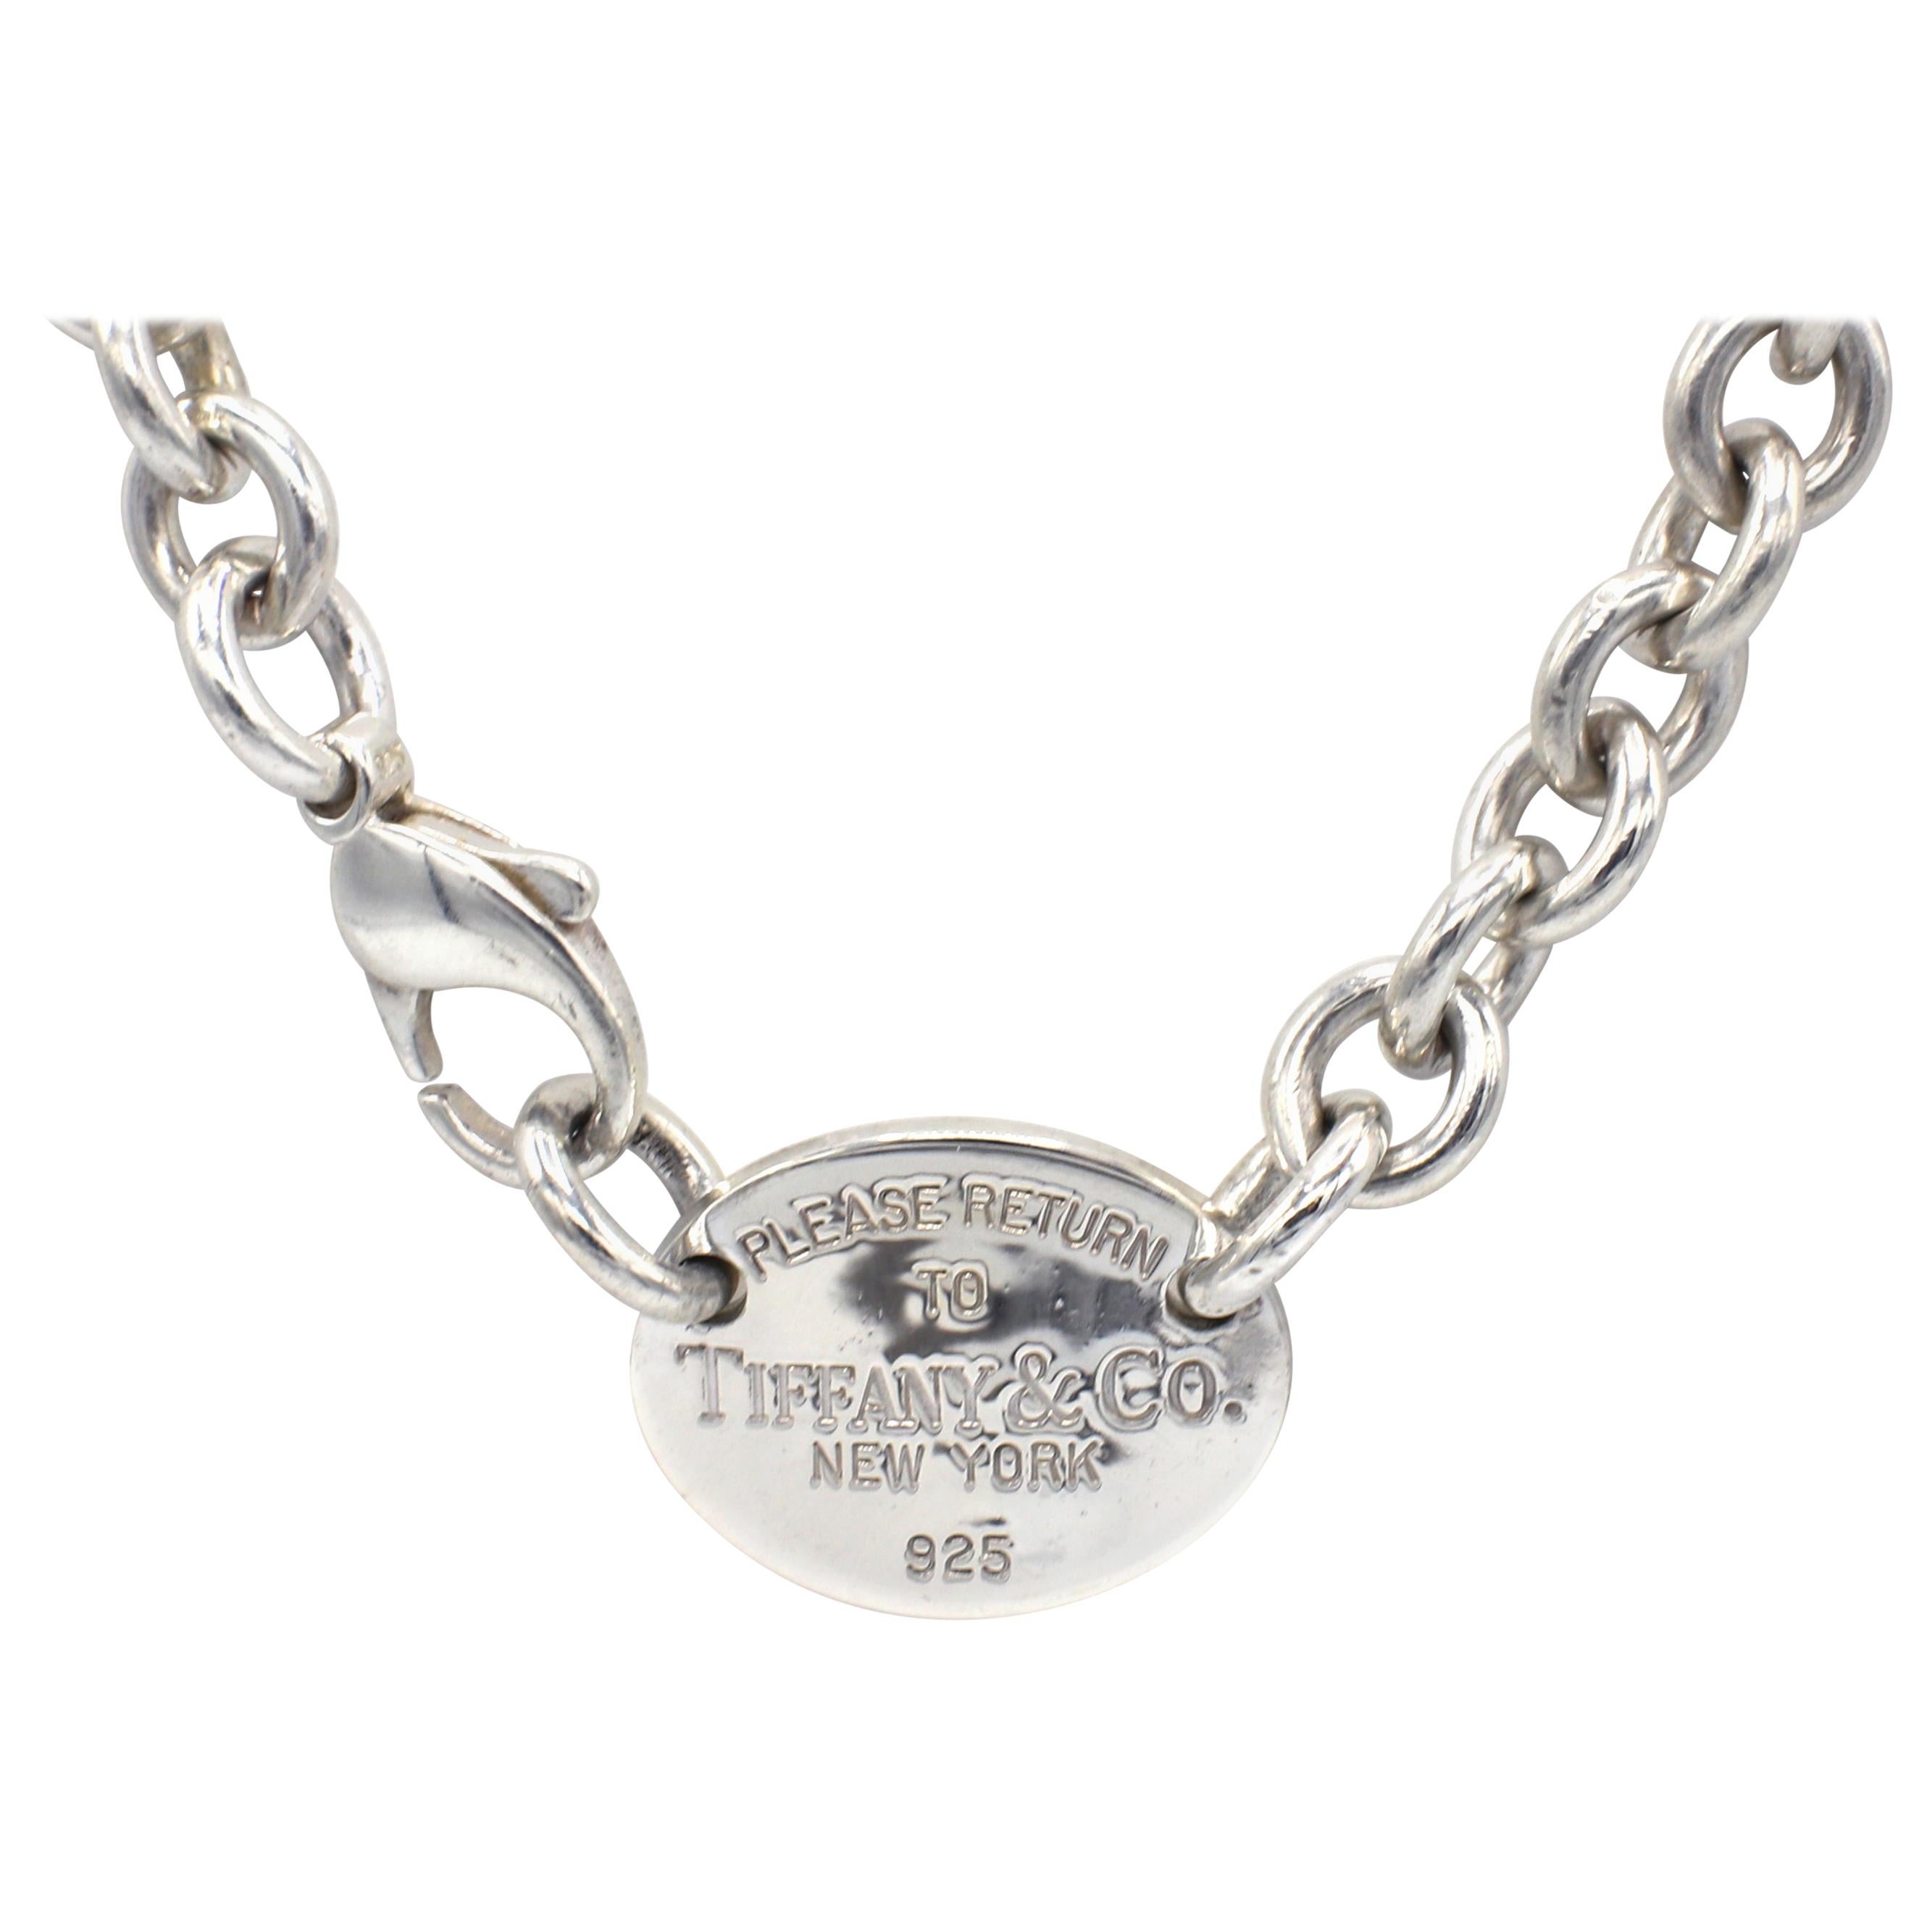 Tiffany & Co. Return to Tiffany Sterling Silver Oval Tag Link Chain Necklace